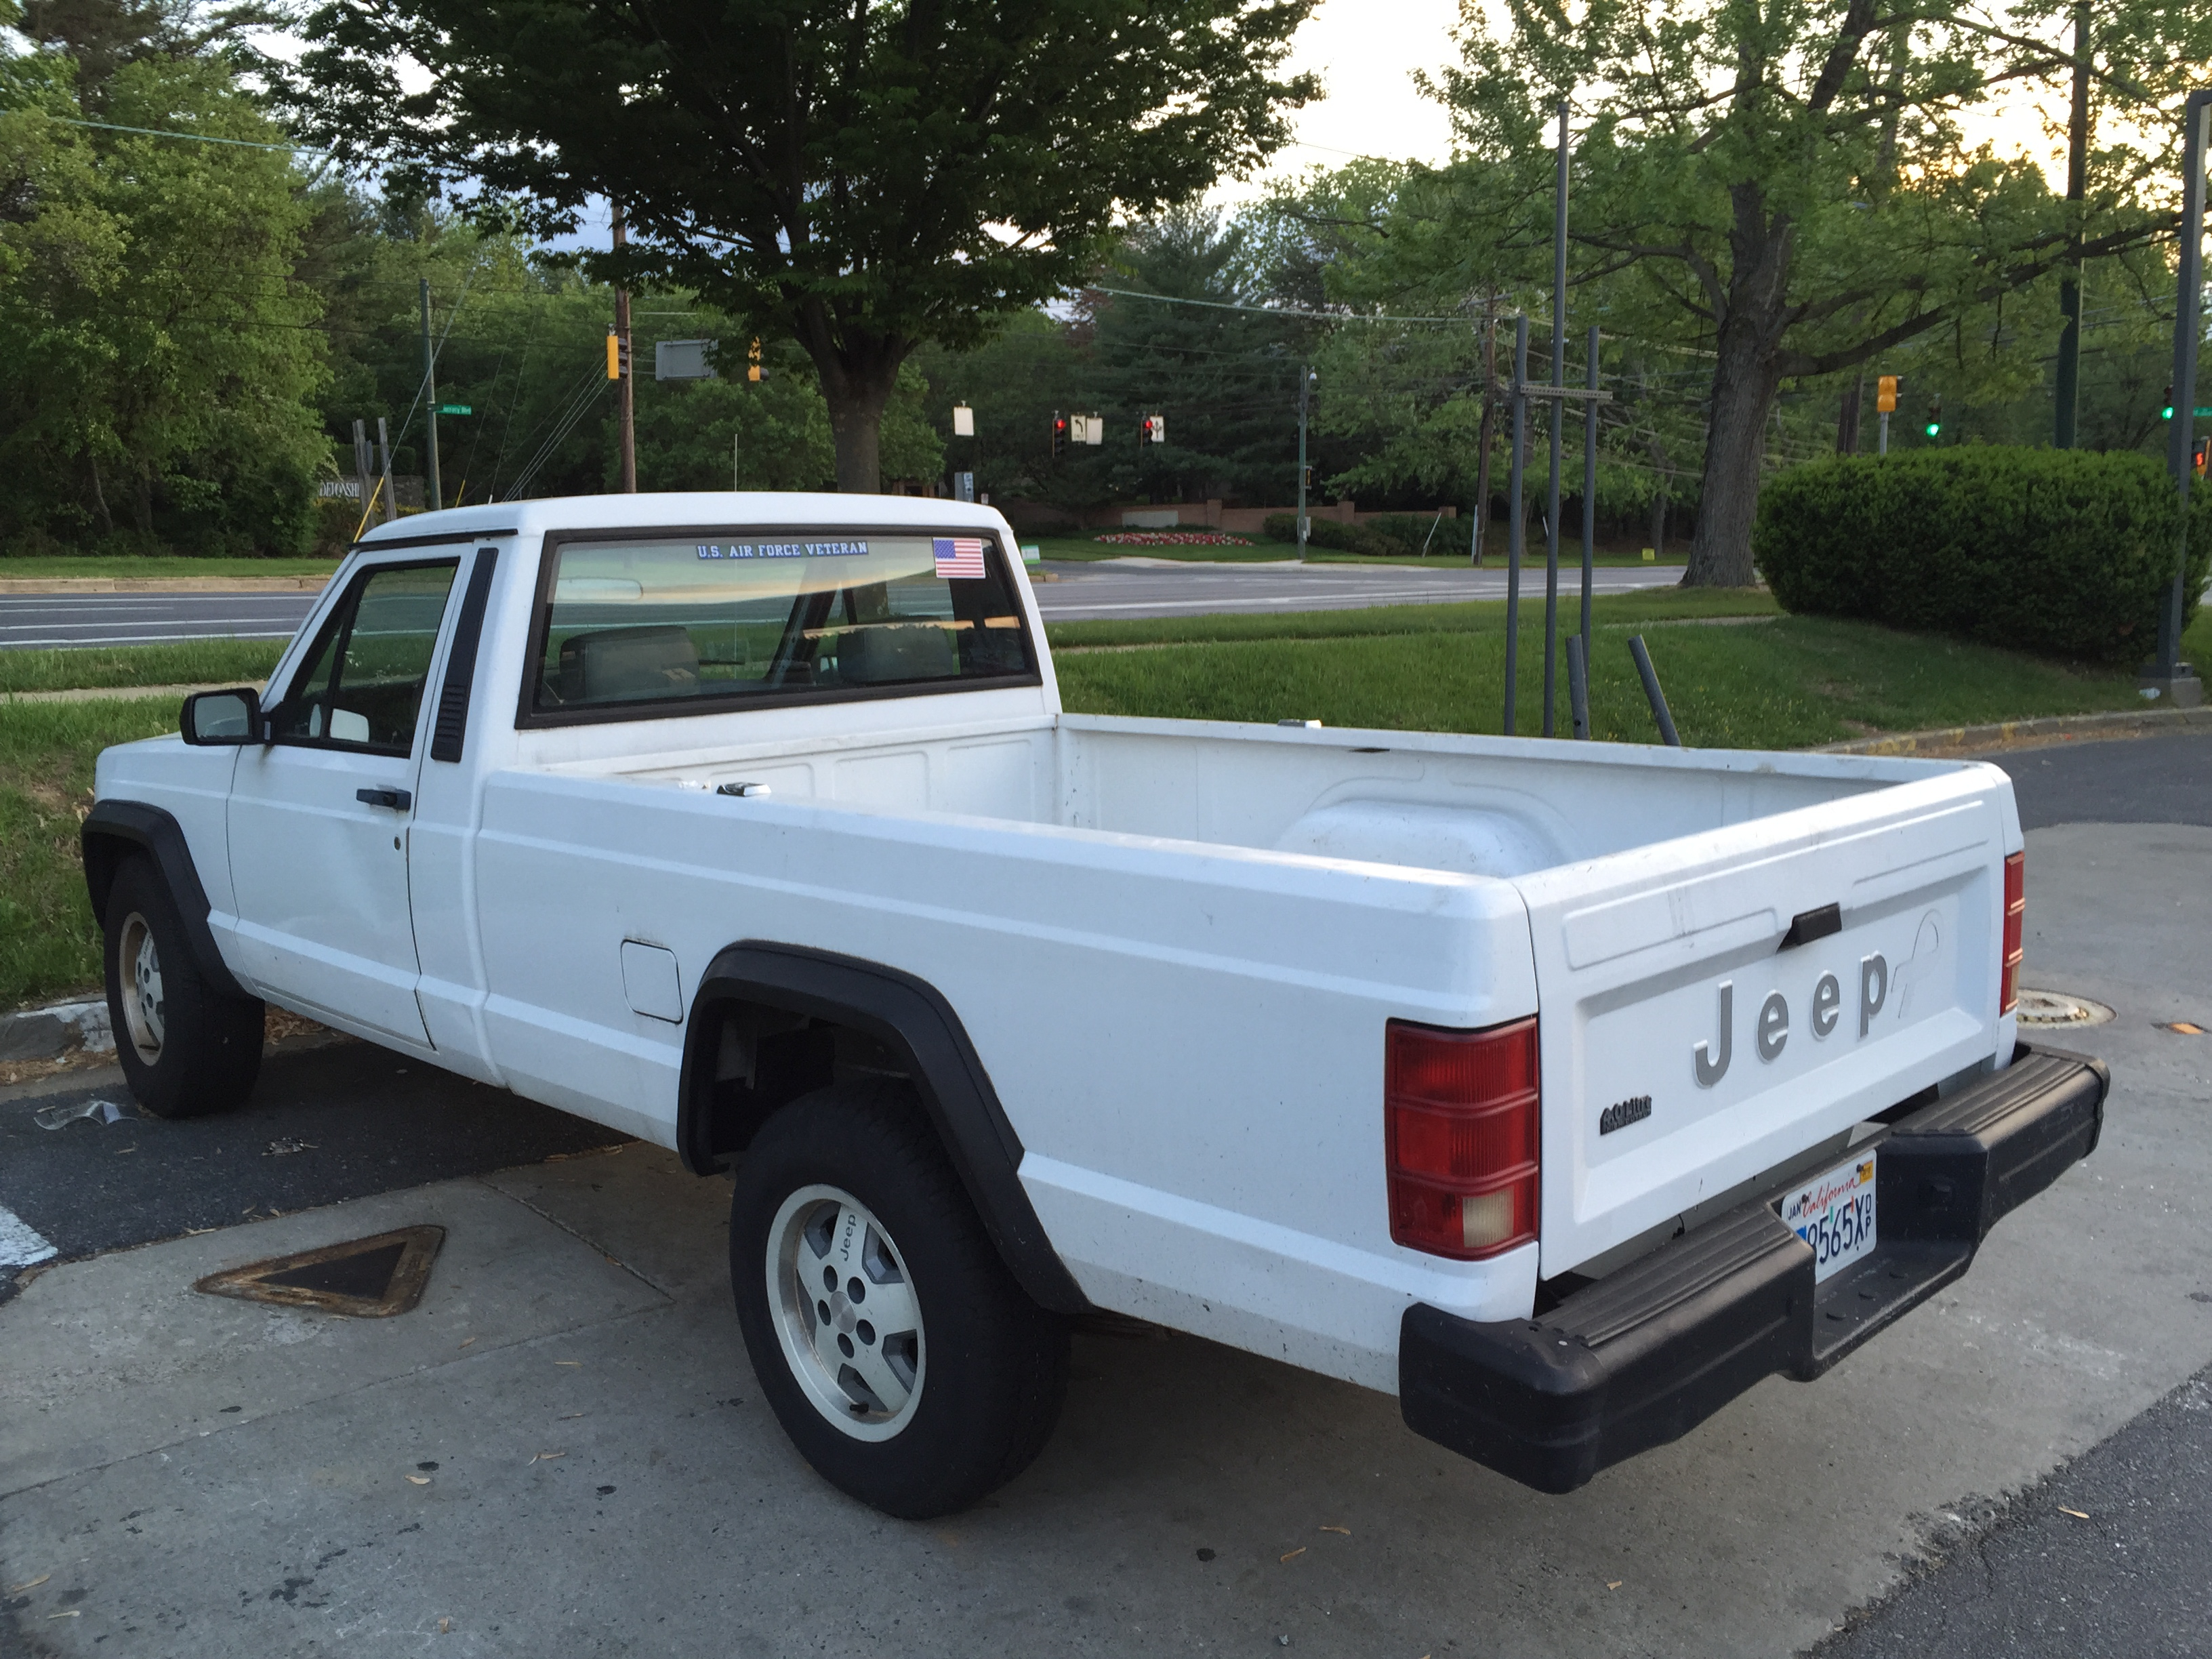 Jeep_Comanche_4.0L_High_Output_six_base_long-bed_model_MD-2.jpg